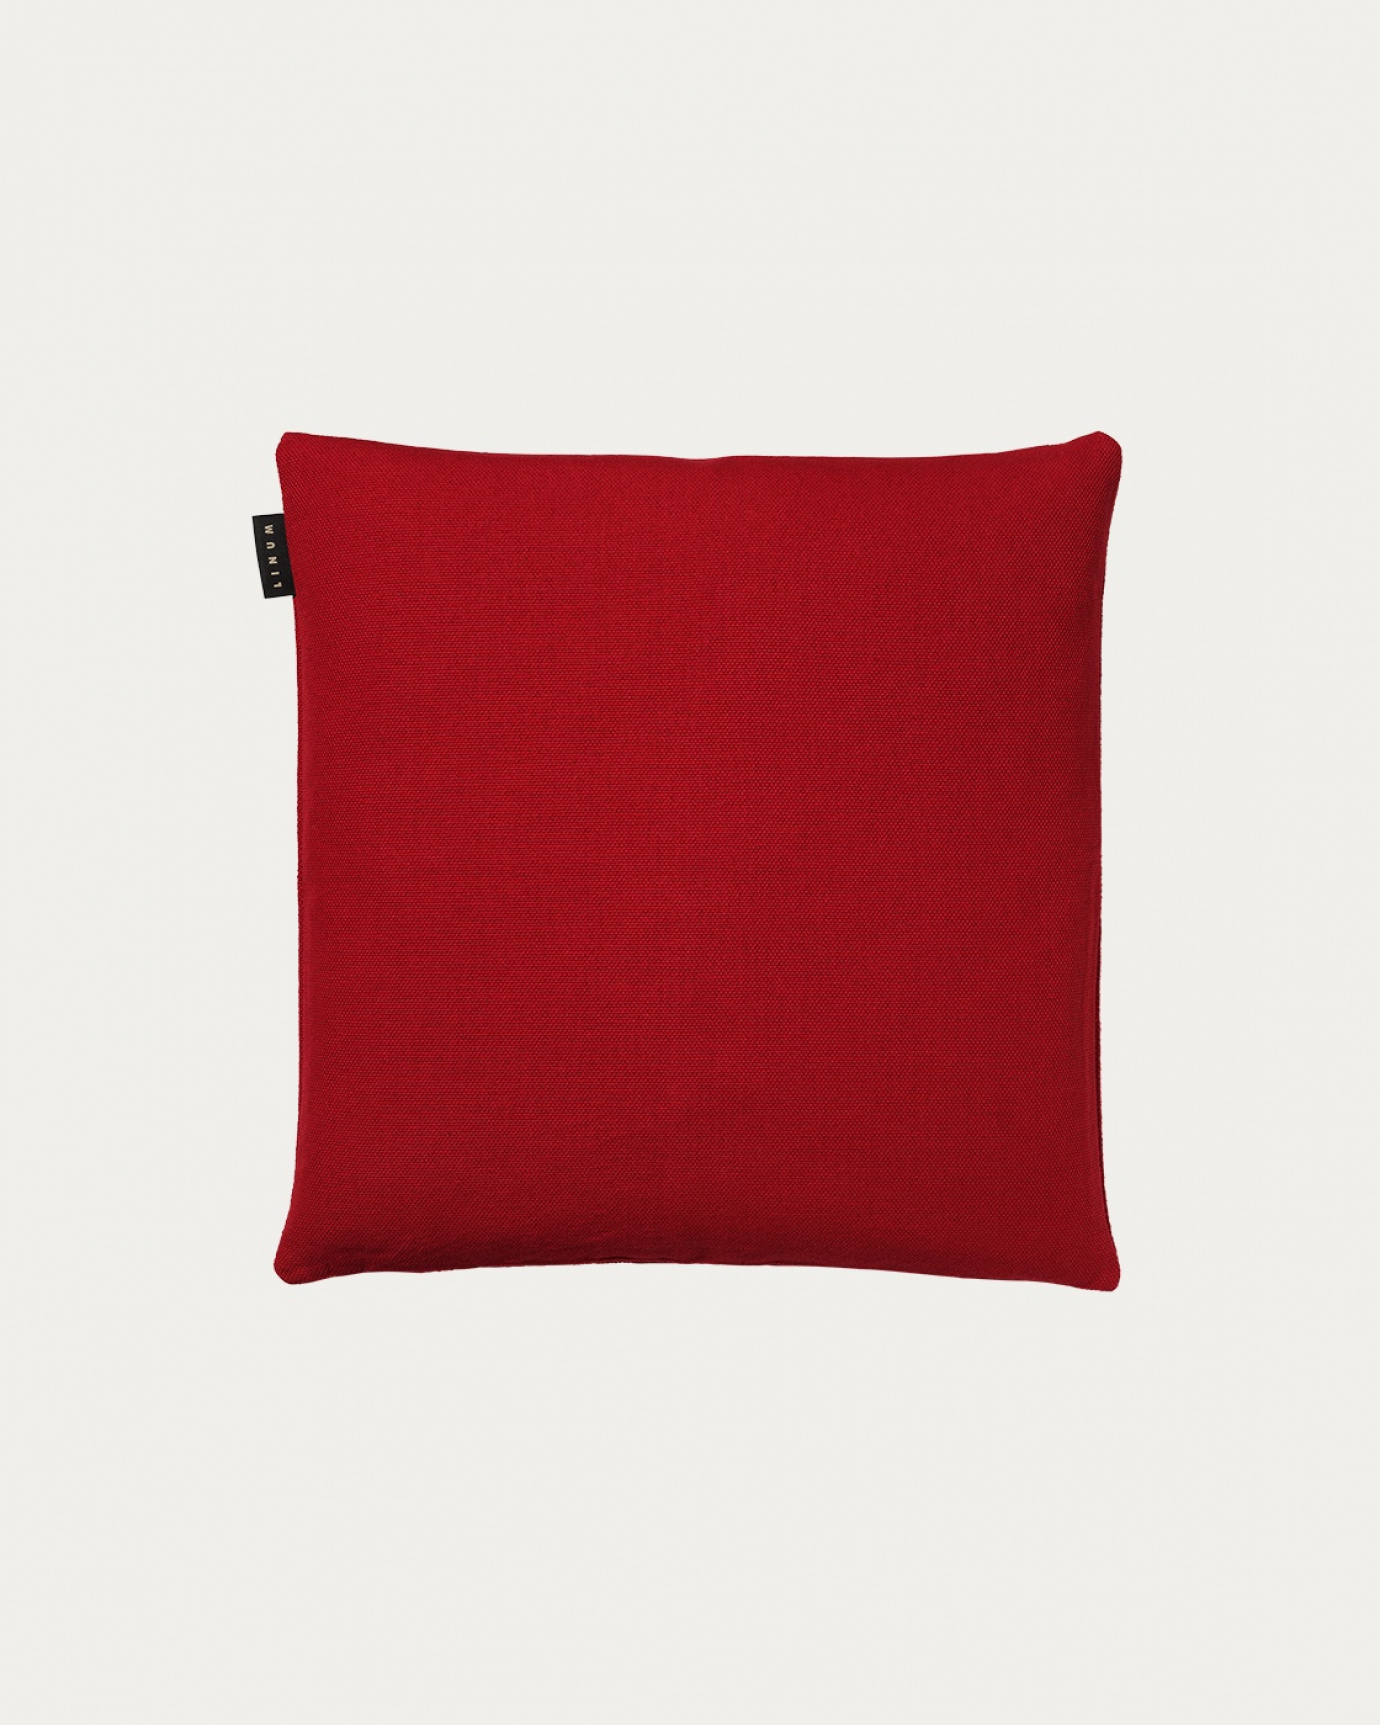 Product image red PEPPER cushion cover made of soft cotton from LINUM DESIGN. Easy to wash and durable for generations. Size 40x40 cm.